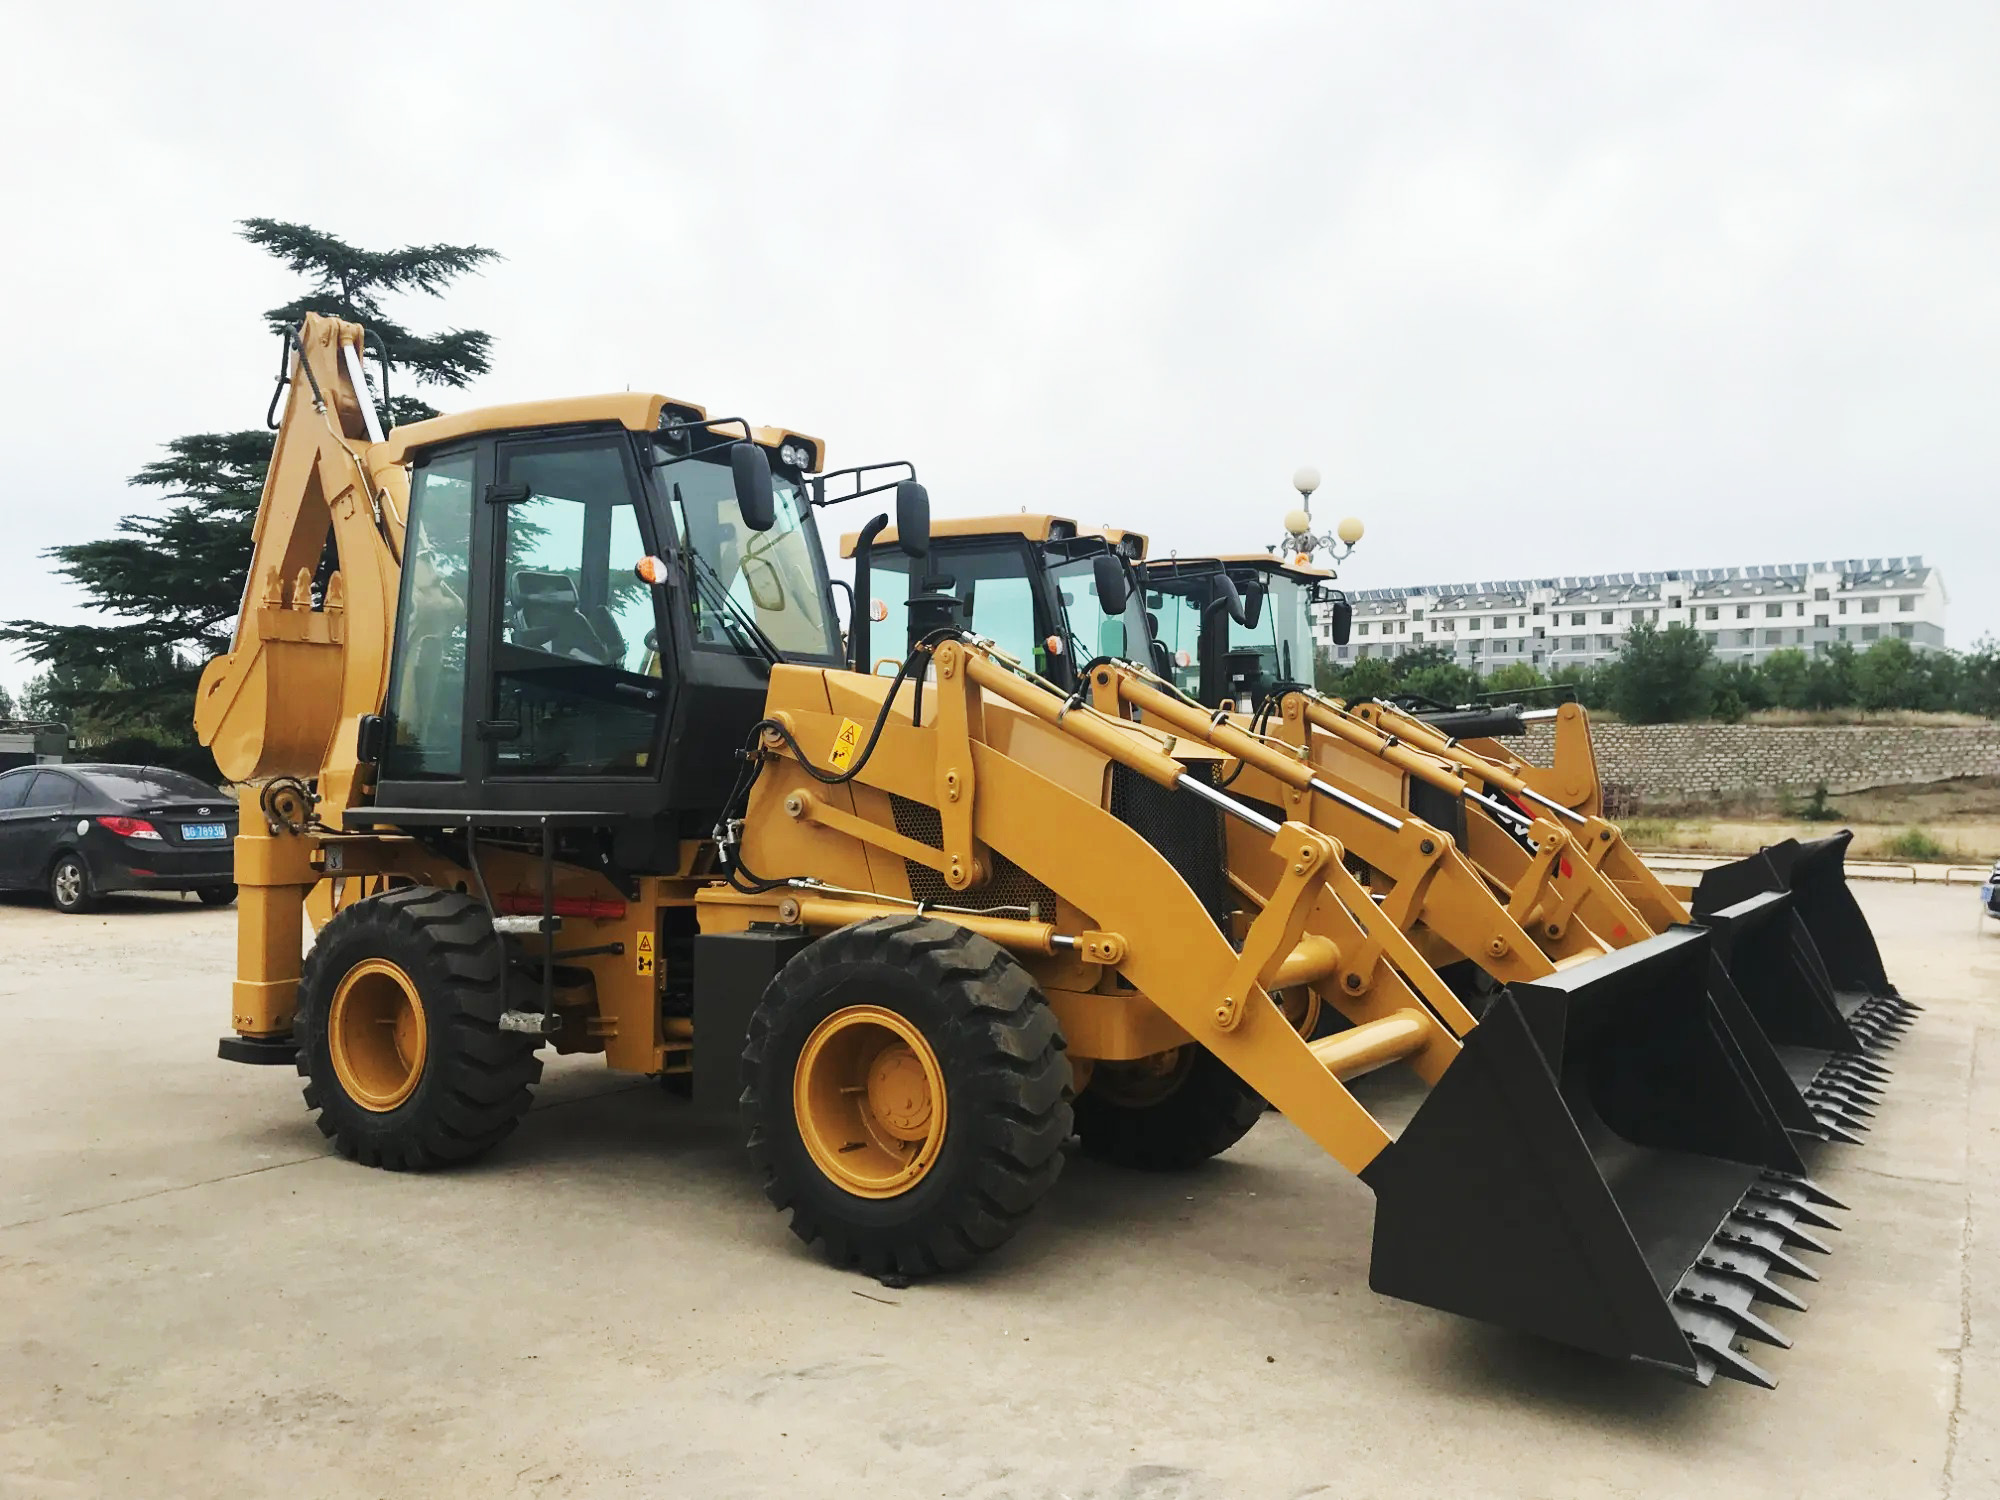 WHAT TO LOOK FOR WHEN BUYING A BACKHOE LOADER